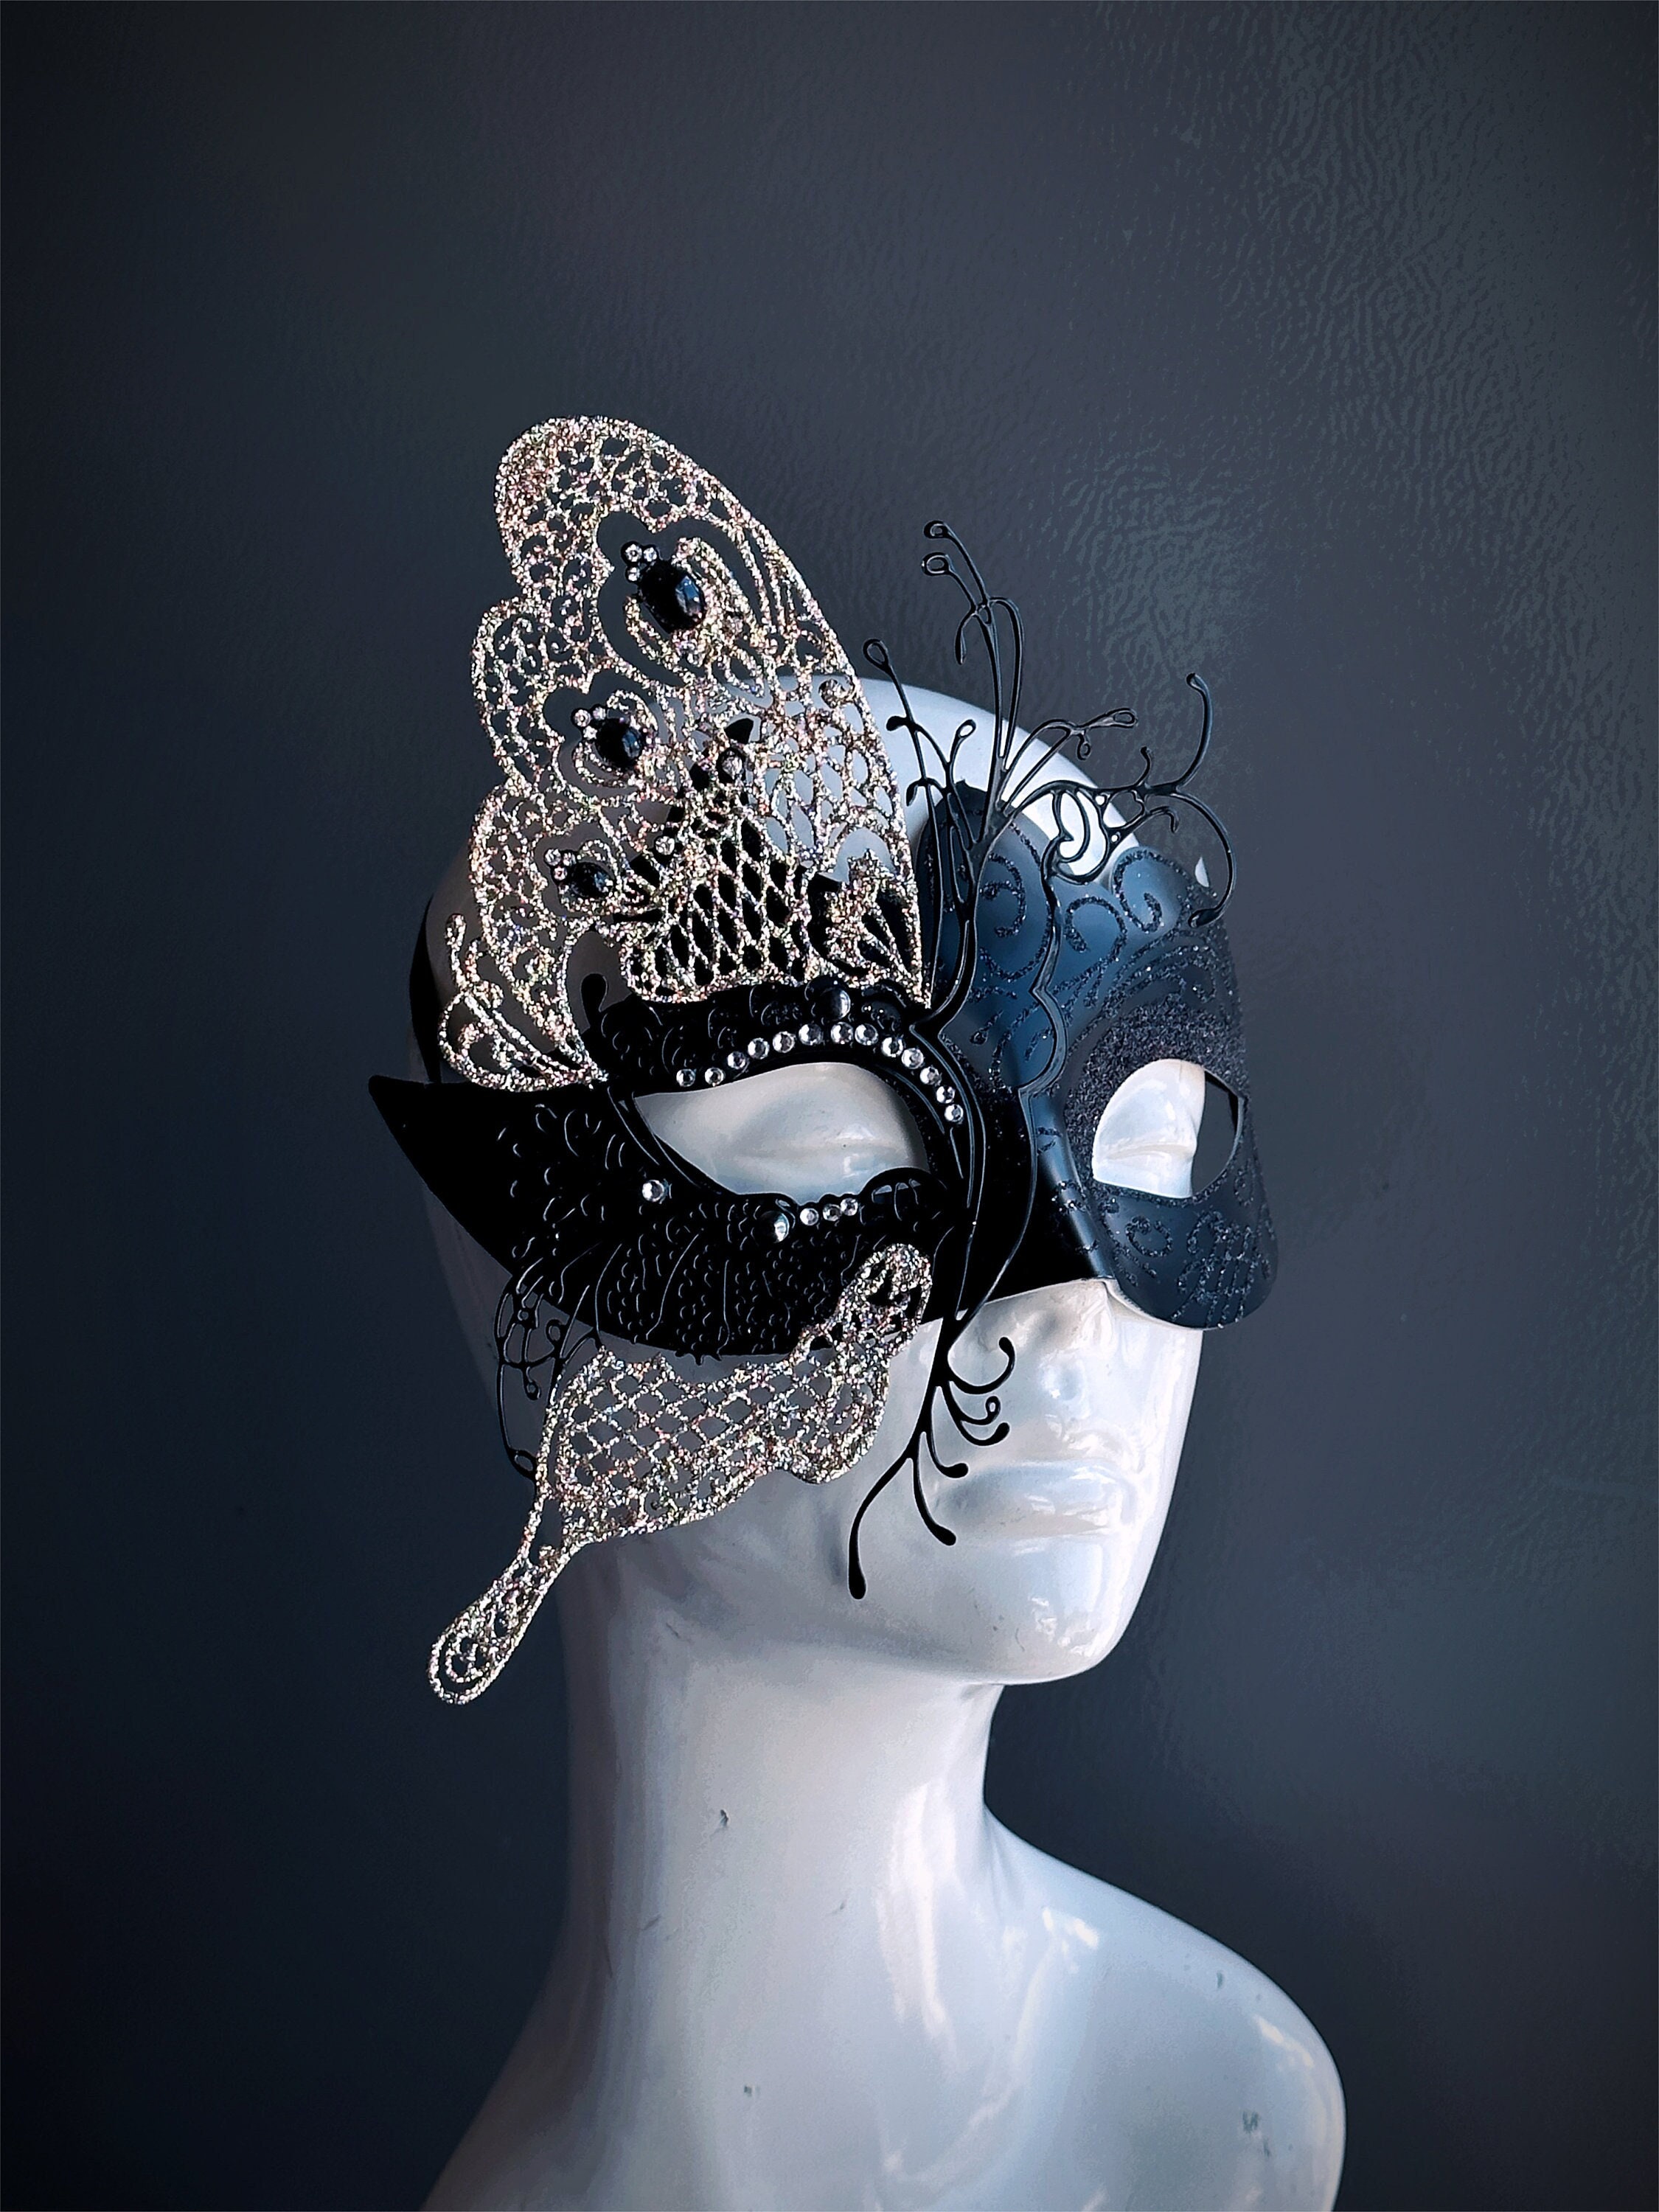 Masquerade Mask Women Lace Venetian Mask Comfortable & Sexy More Colors  Customized 